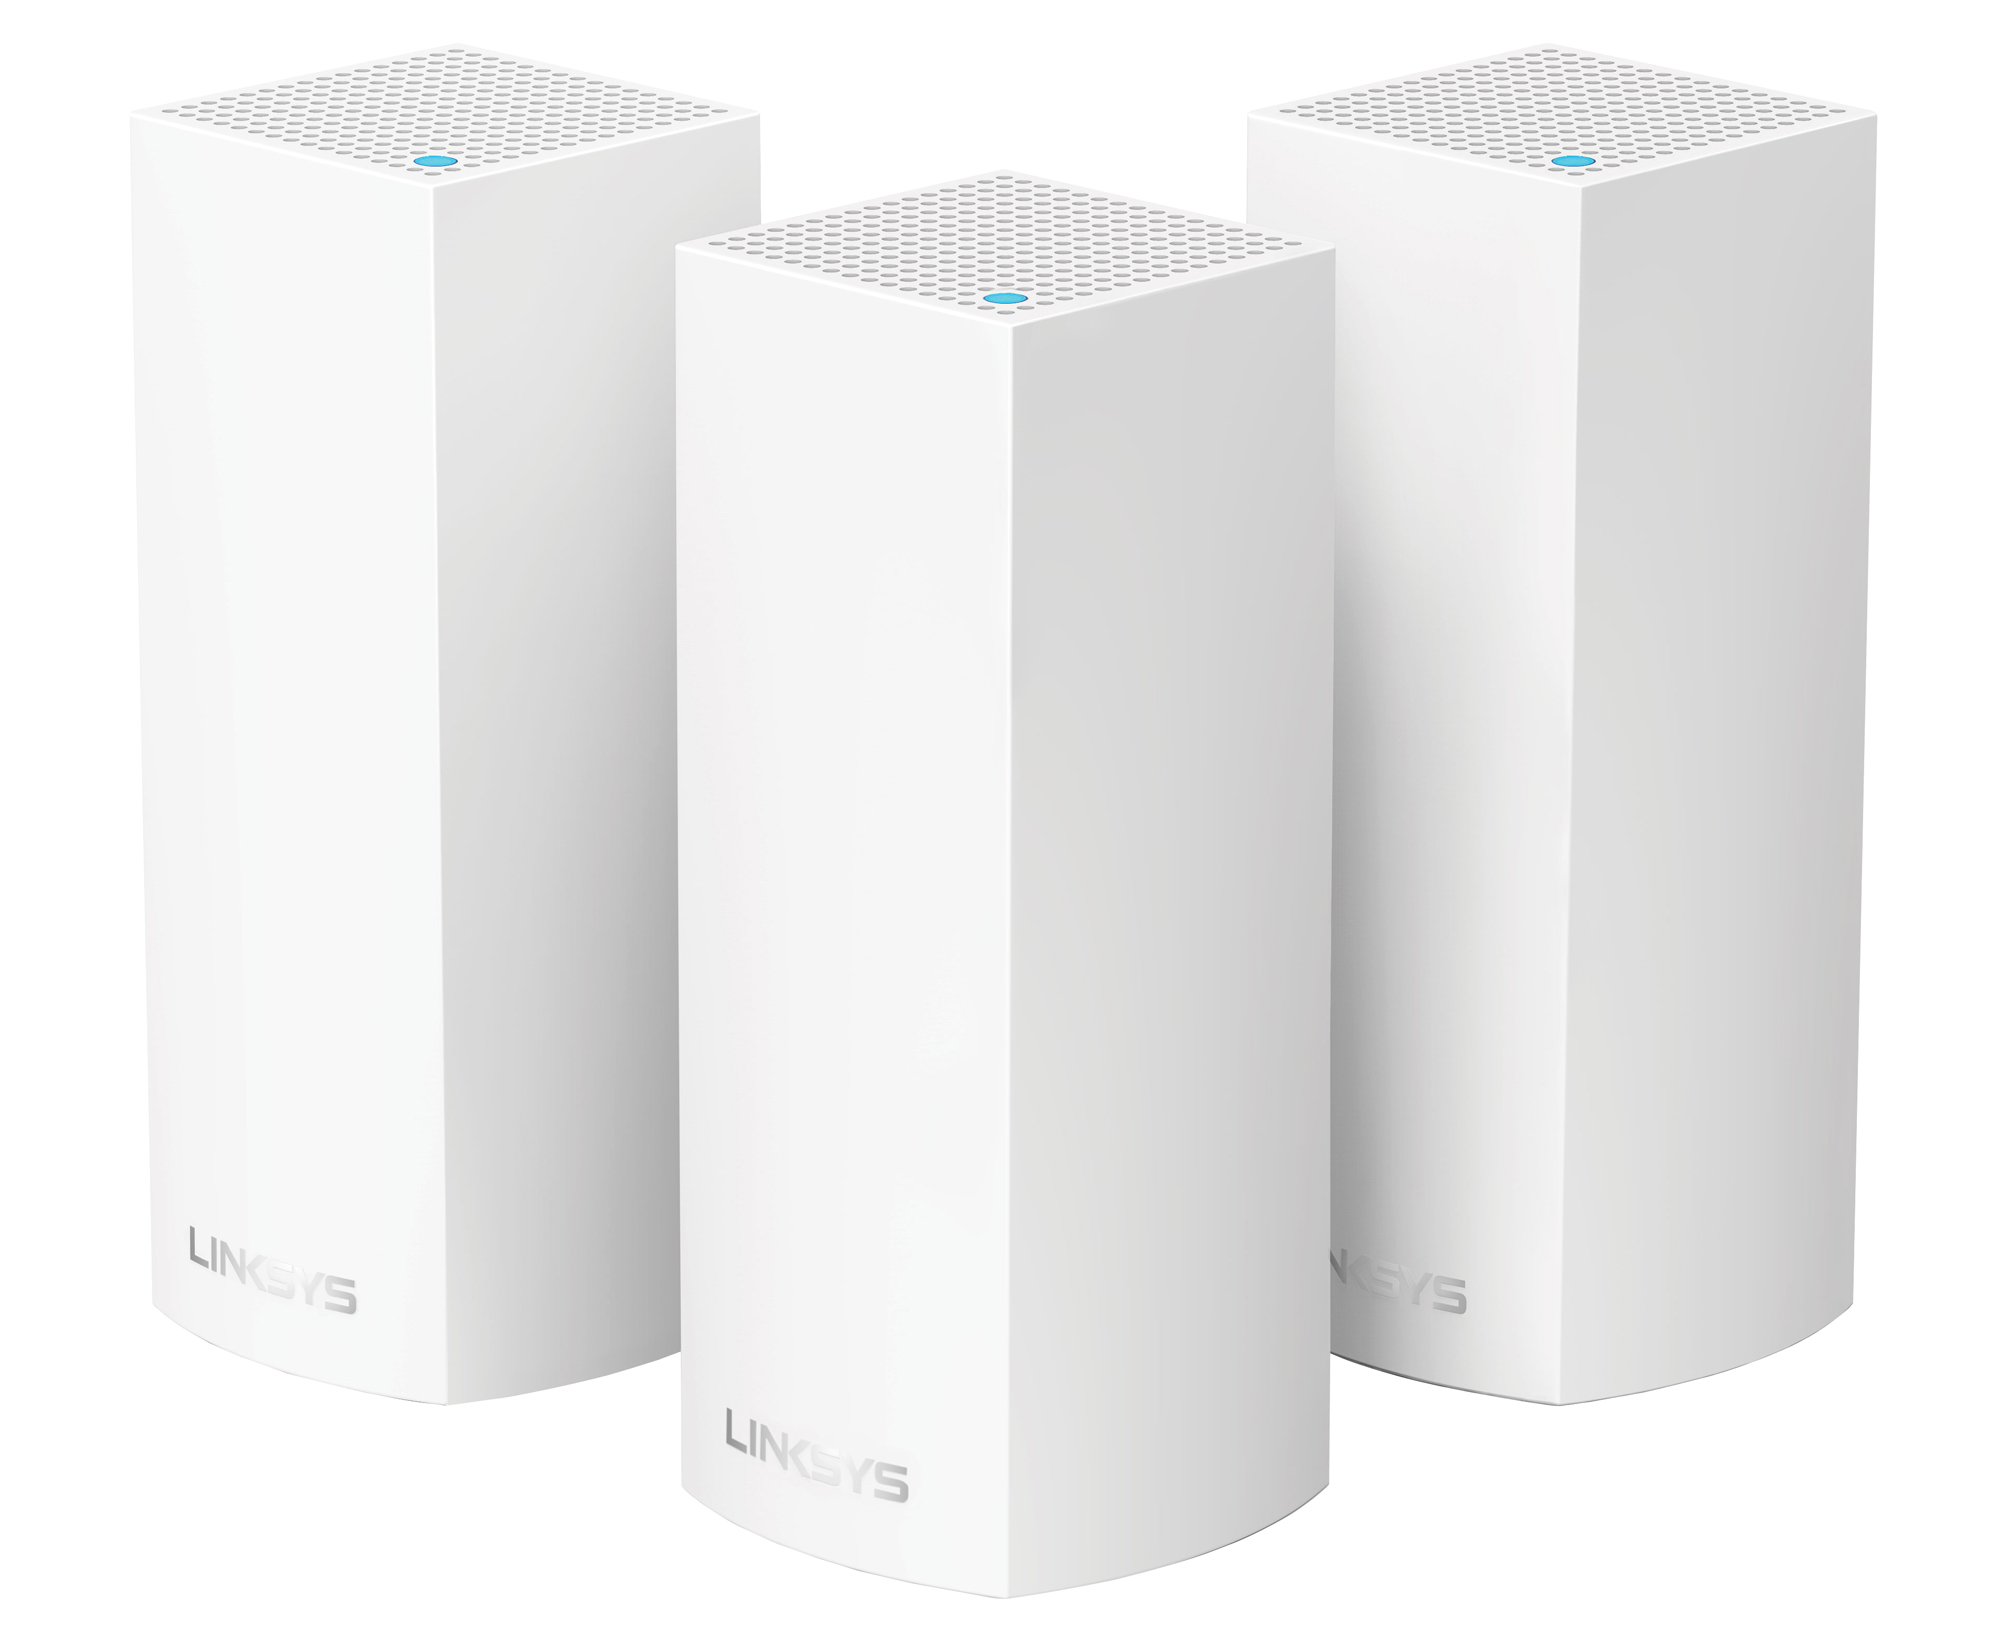 Linksys Wants To Eliminate Wi-Fi Dead Spots With These Tiny Towers Scattered Around Your Home